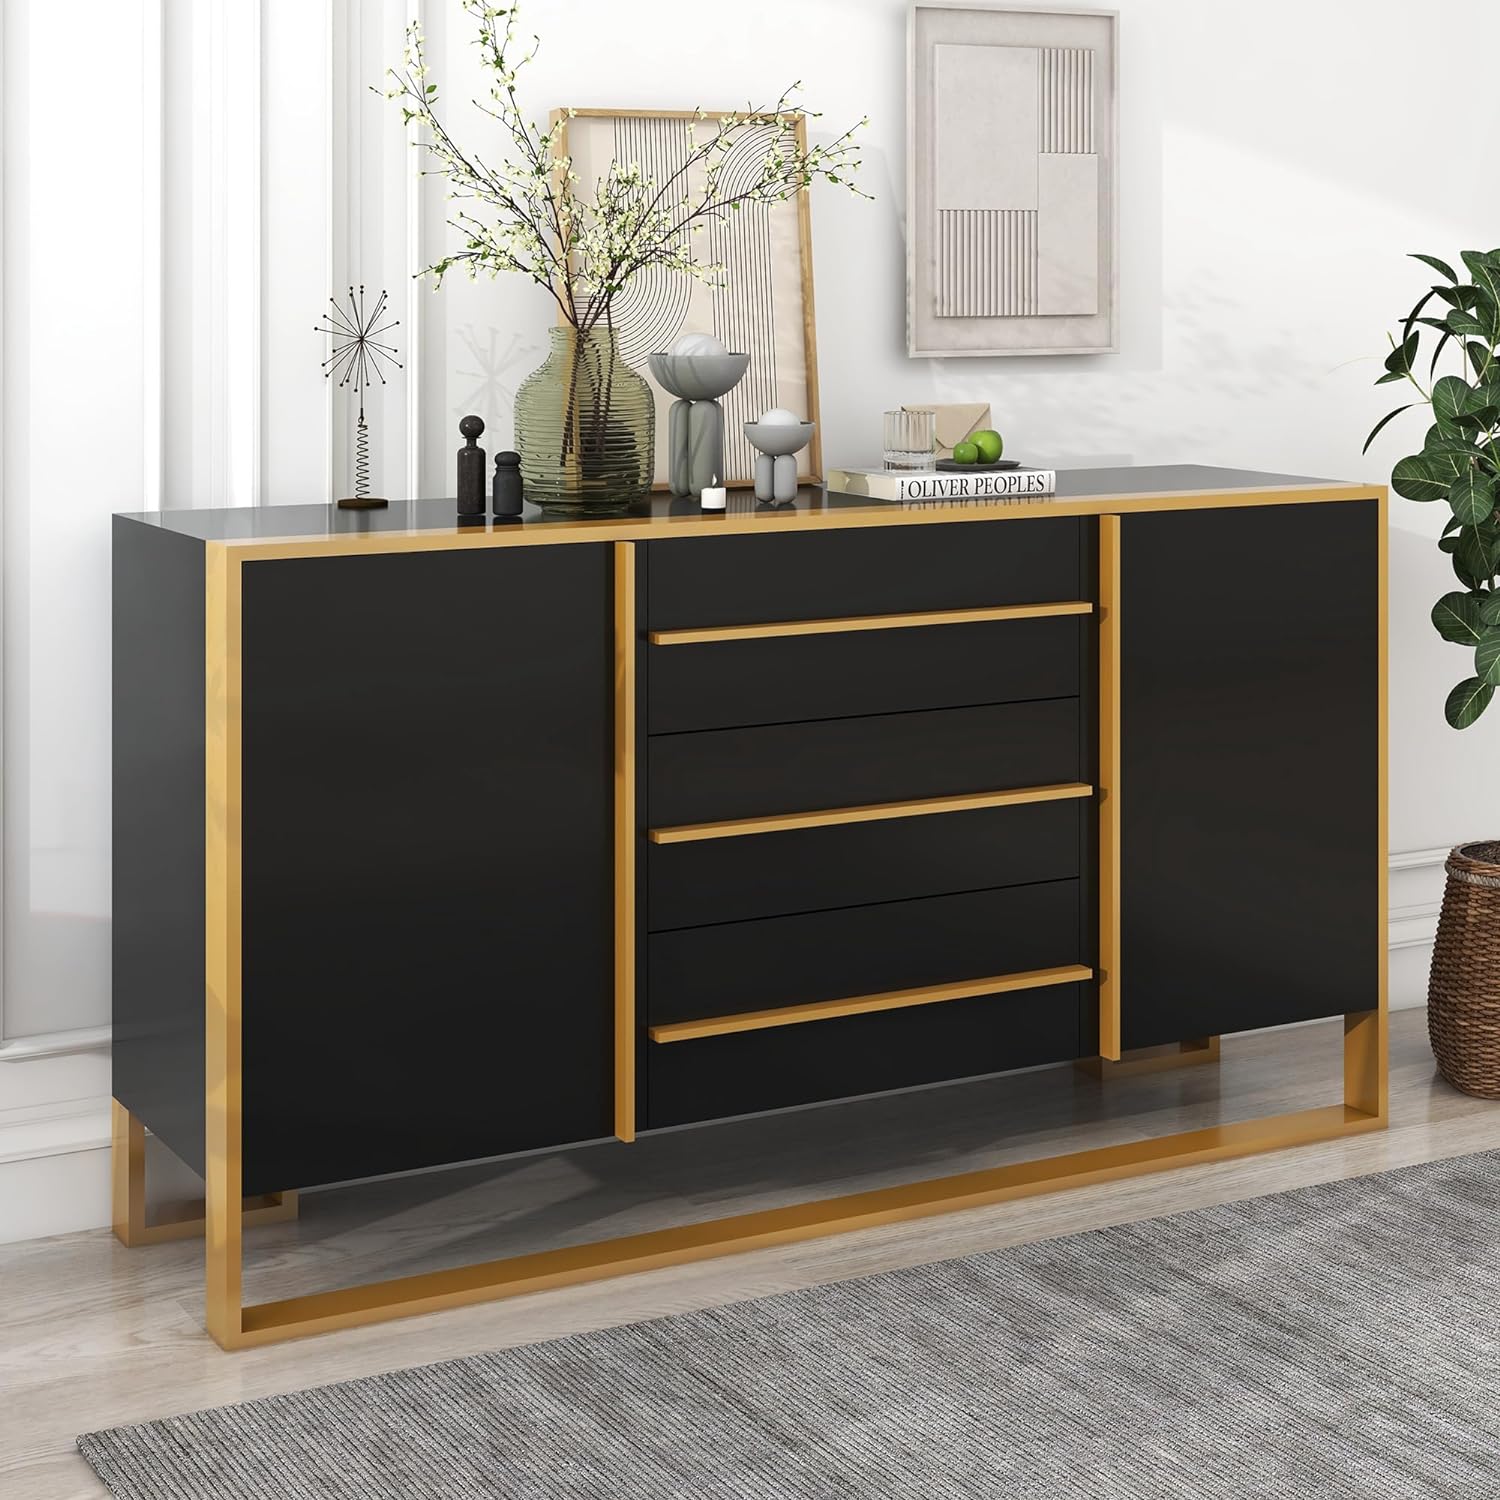 WILLIAMSPACE 59 Black Sideboard Buffet Cabinet with 3 Drawers, Modern Wood Cabinet with Gold Metal Frame, Large Storage Space, Adjustable Shelves, Sideboard for Living Room, Entryway (Black)